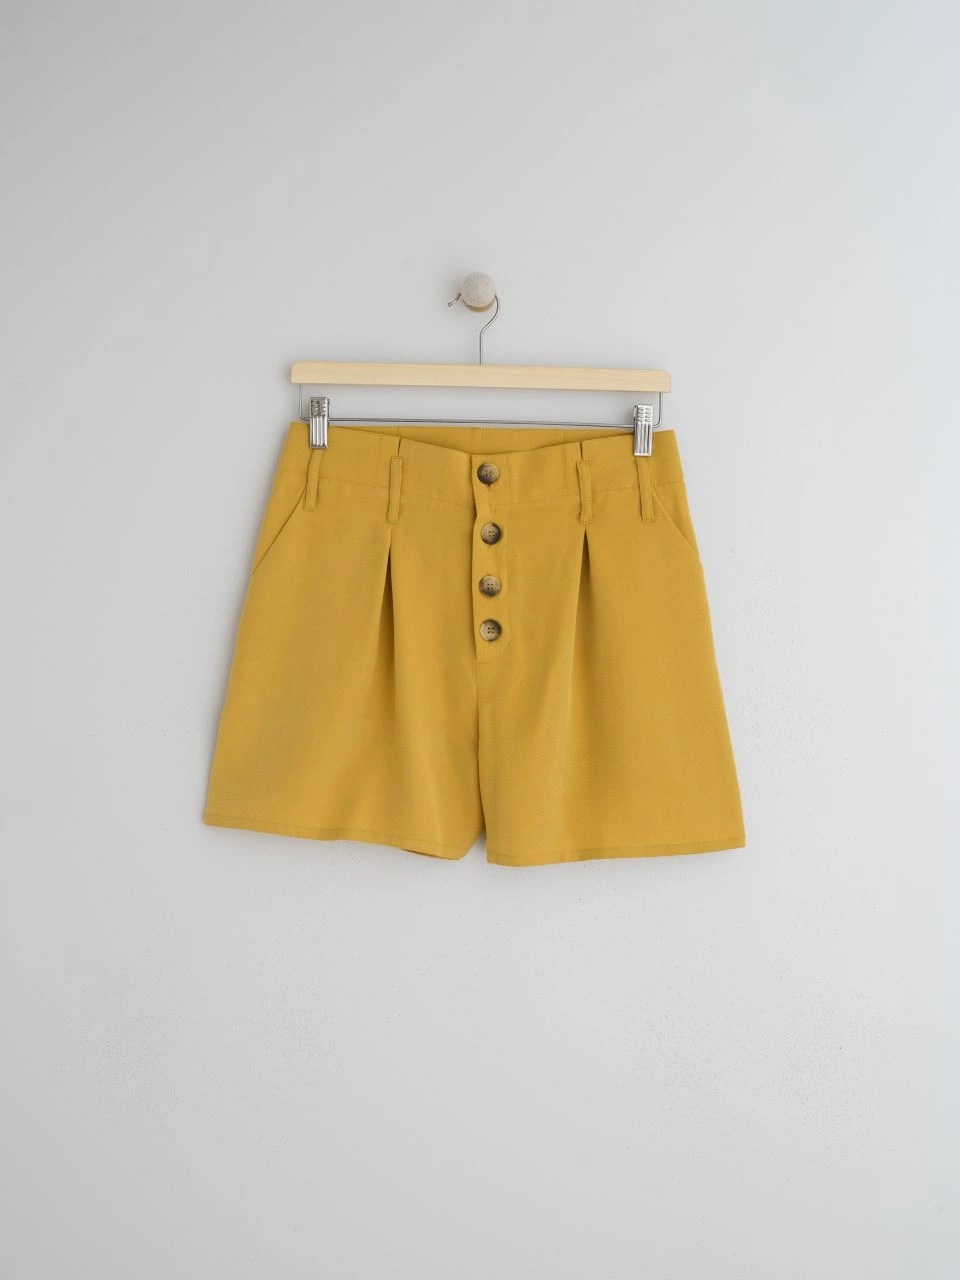 indi&amp;cold - CLASSIC PLEATED SHORTS - Amber 6